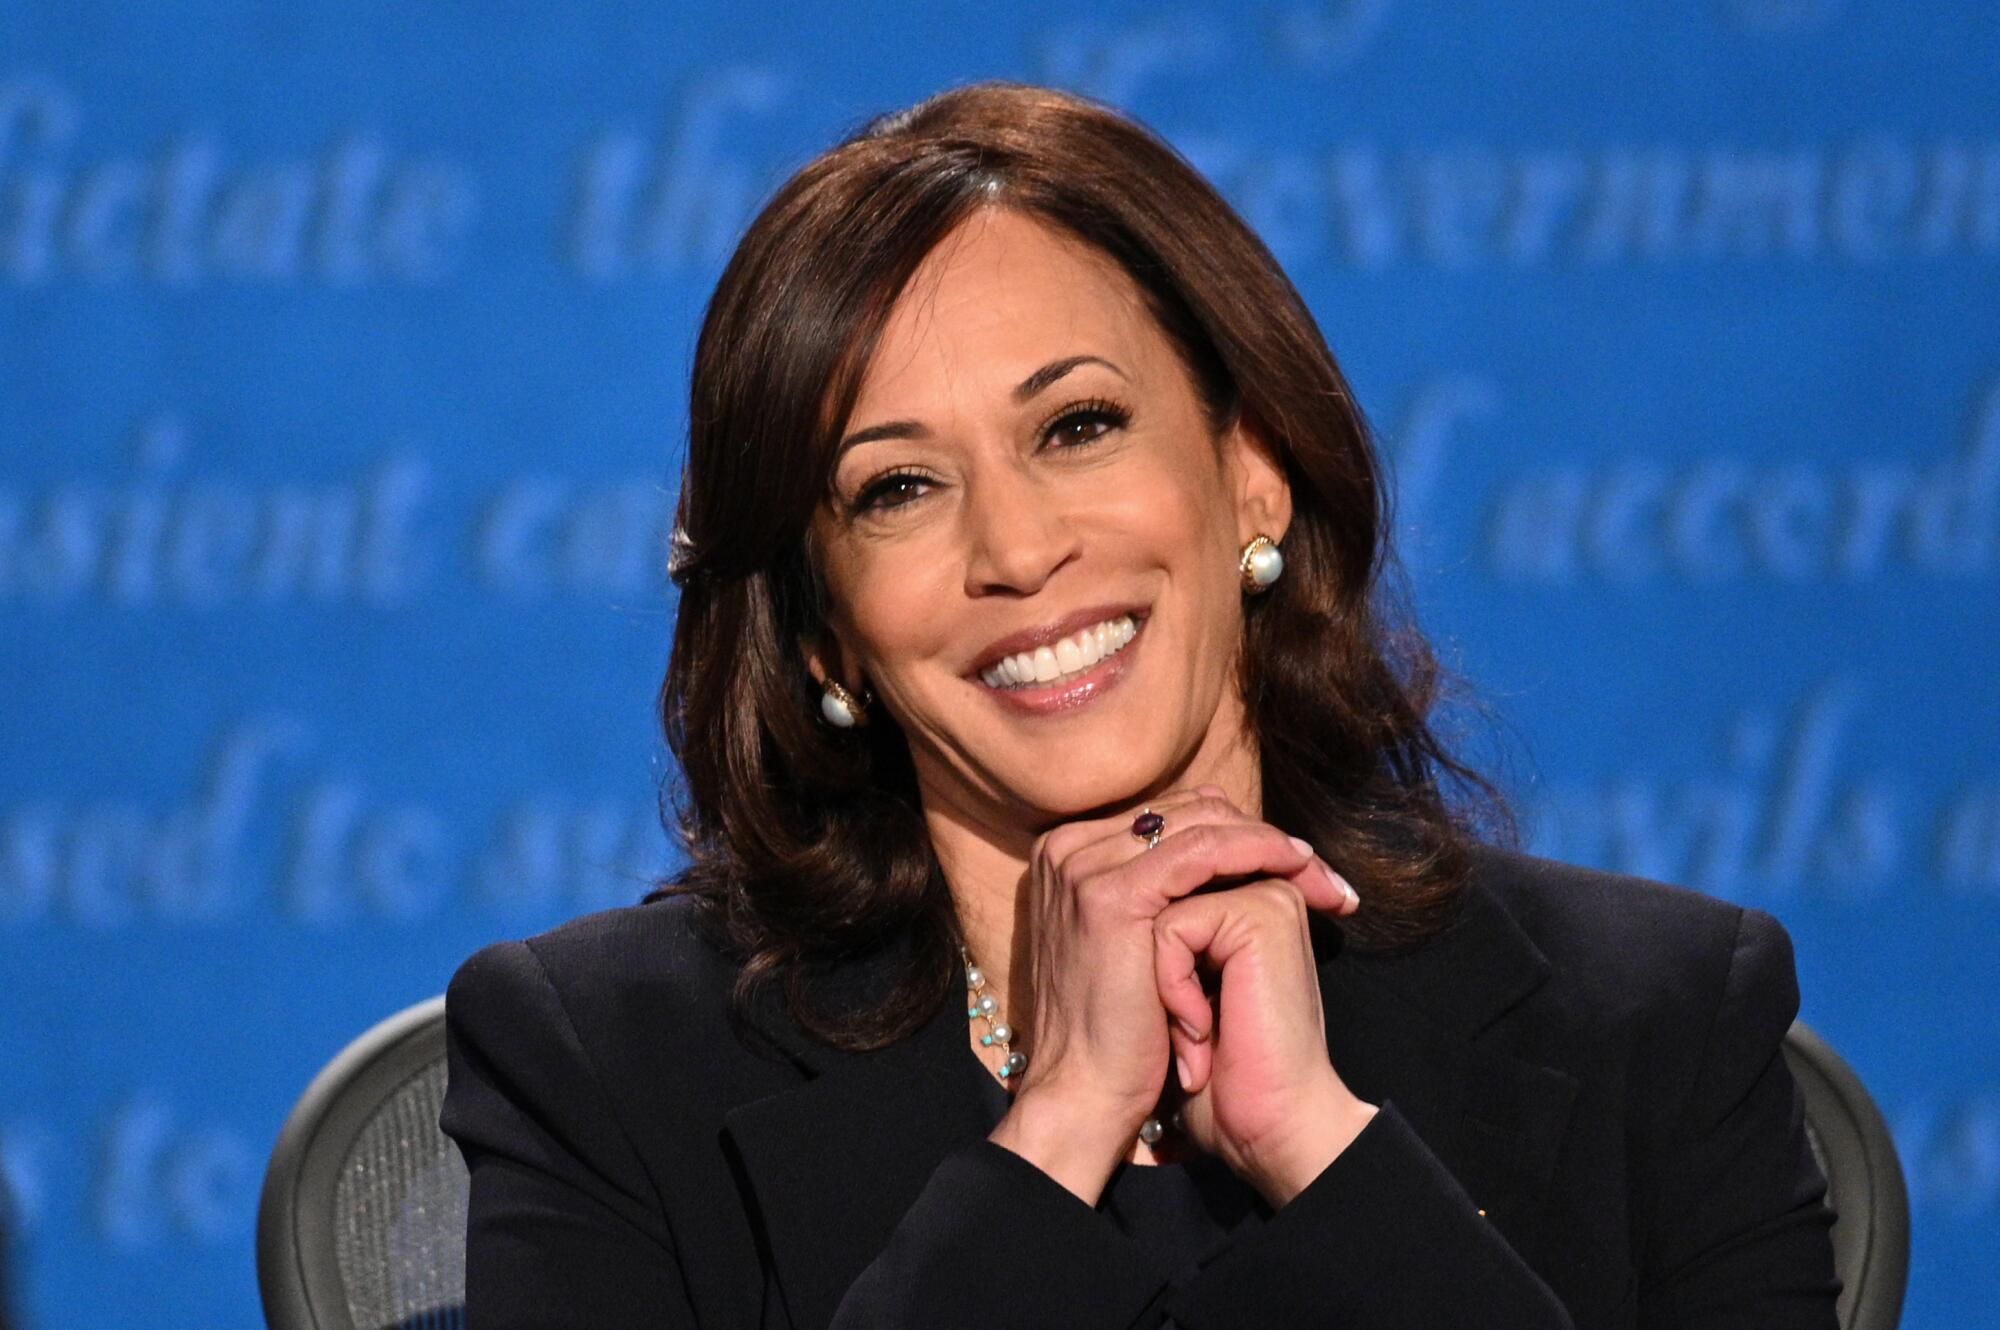 Kamala Harris smiles with her hands clasped under her chin